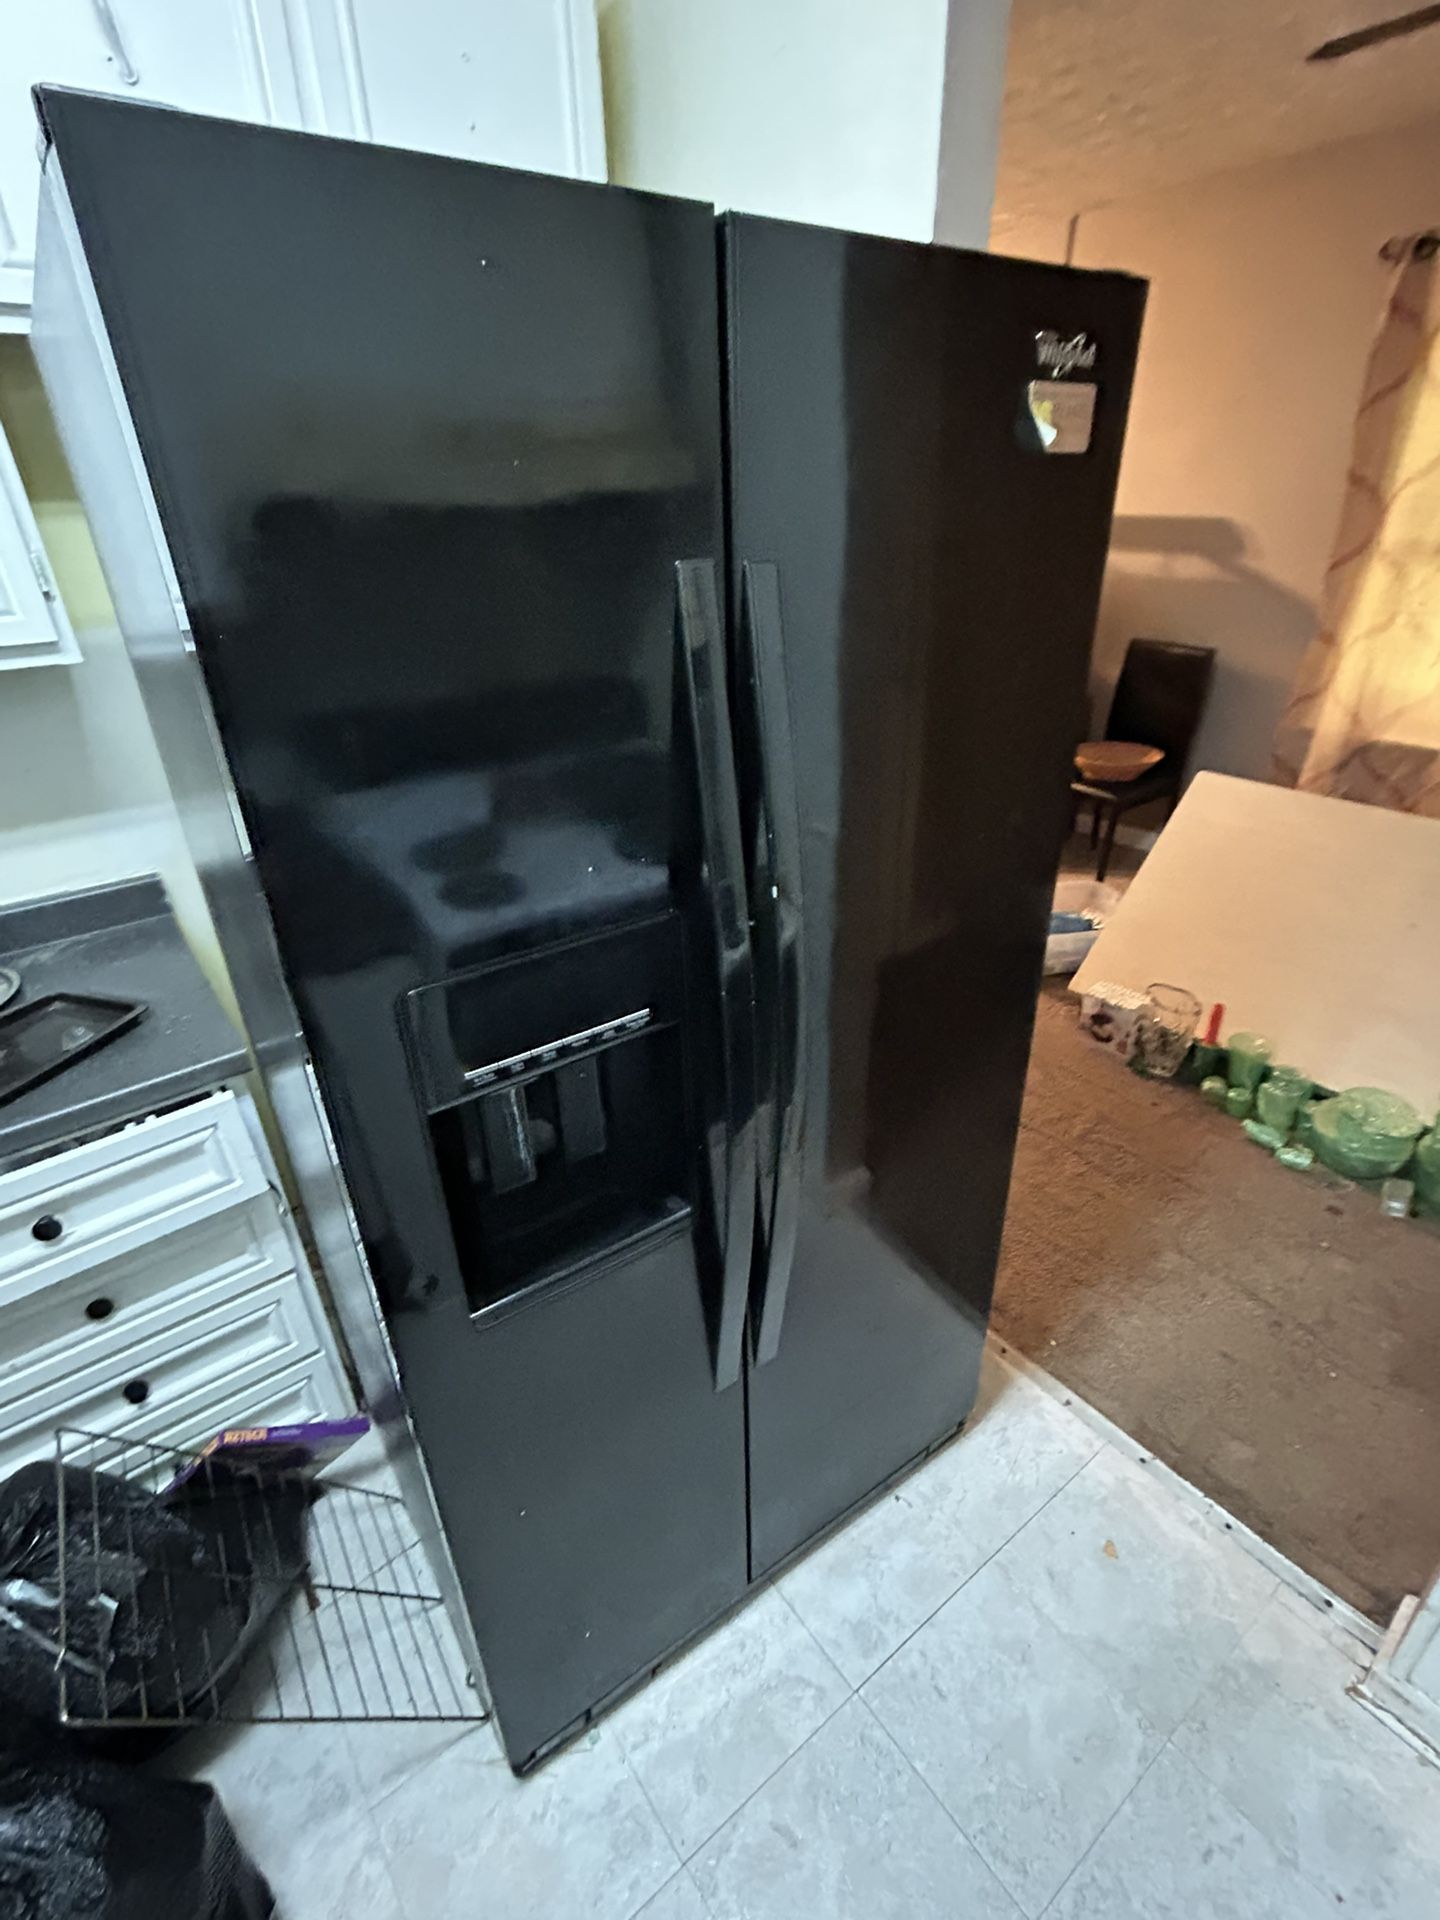 Whirl Pool Refrigerator (Had For 3 Years) But Im Moving